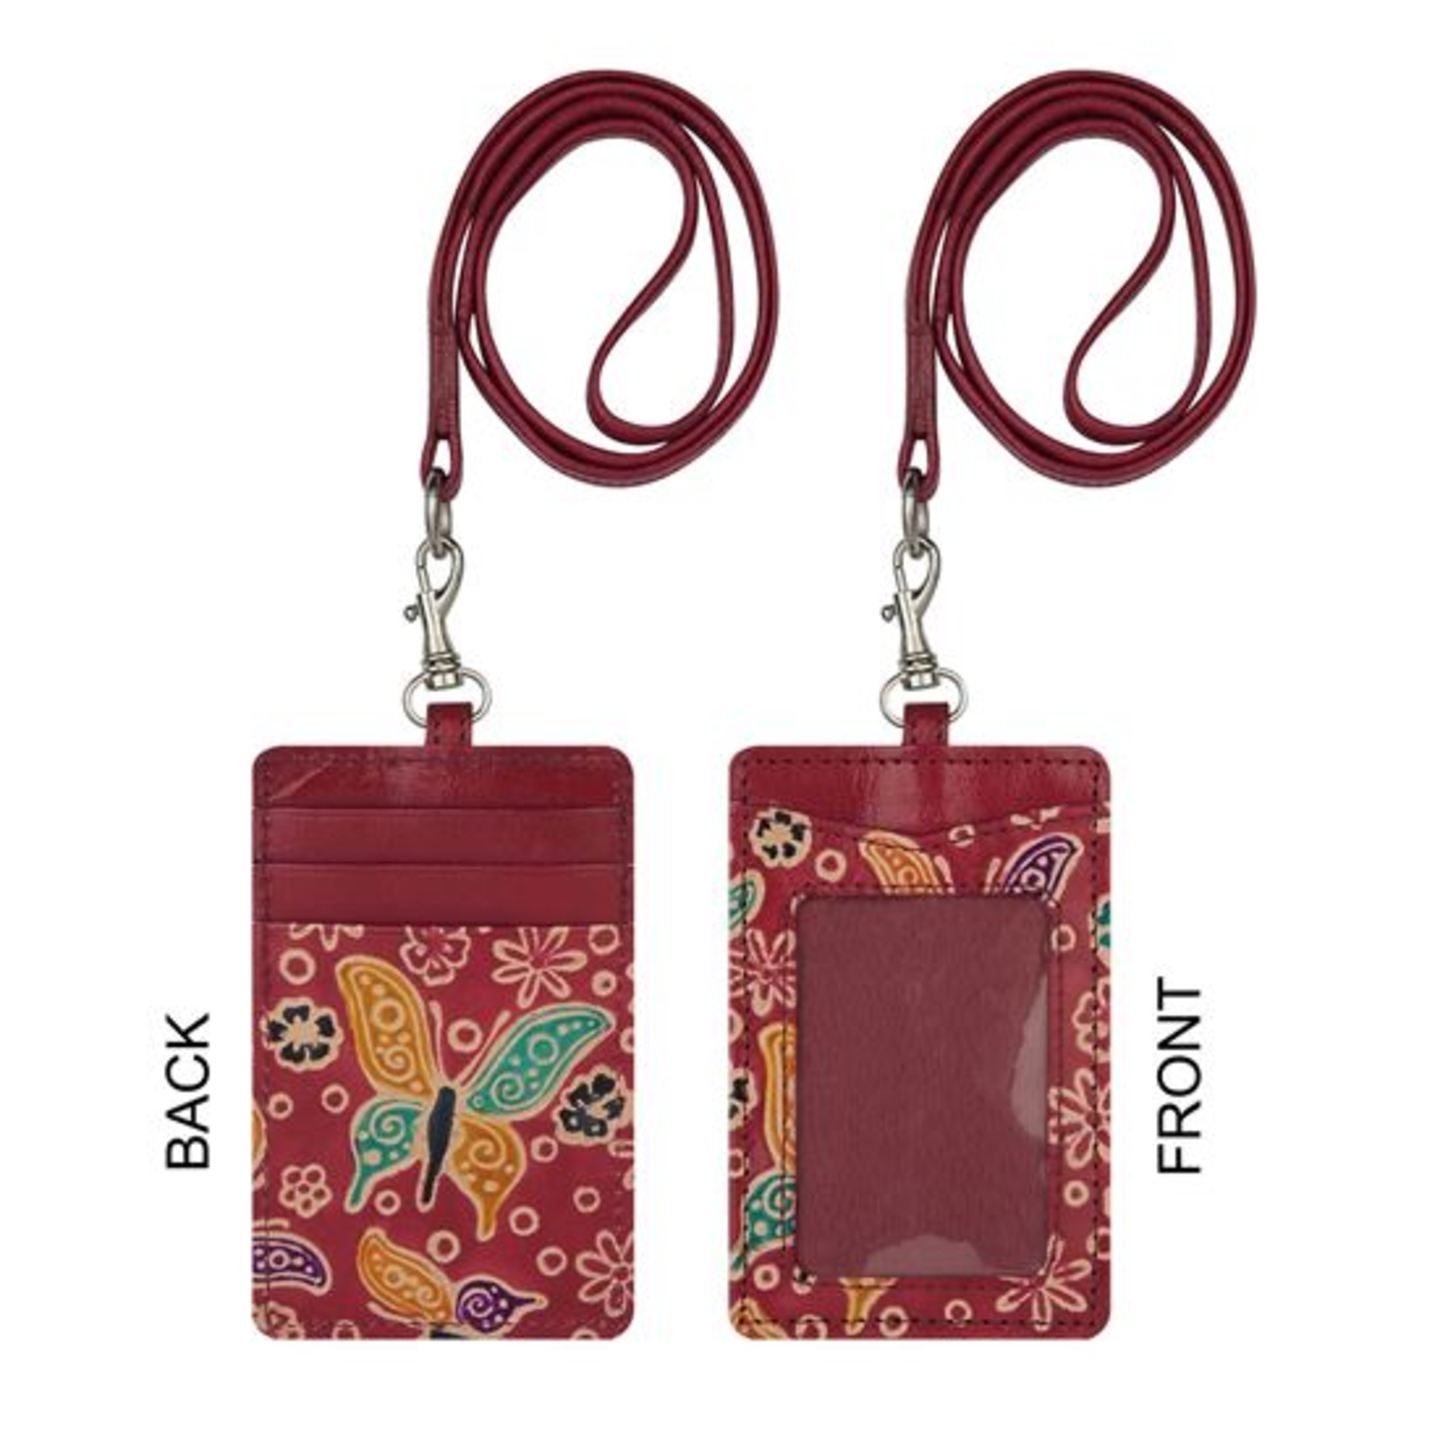 Eco Trends Handpainted Leather ID & Cardholder Lanyard Butterfly Red